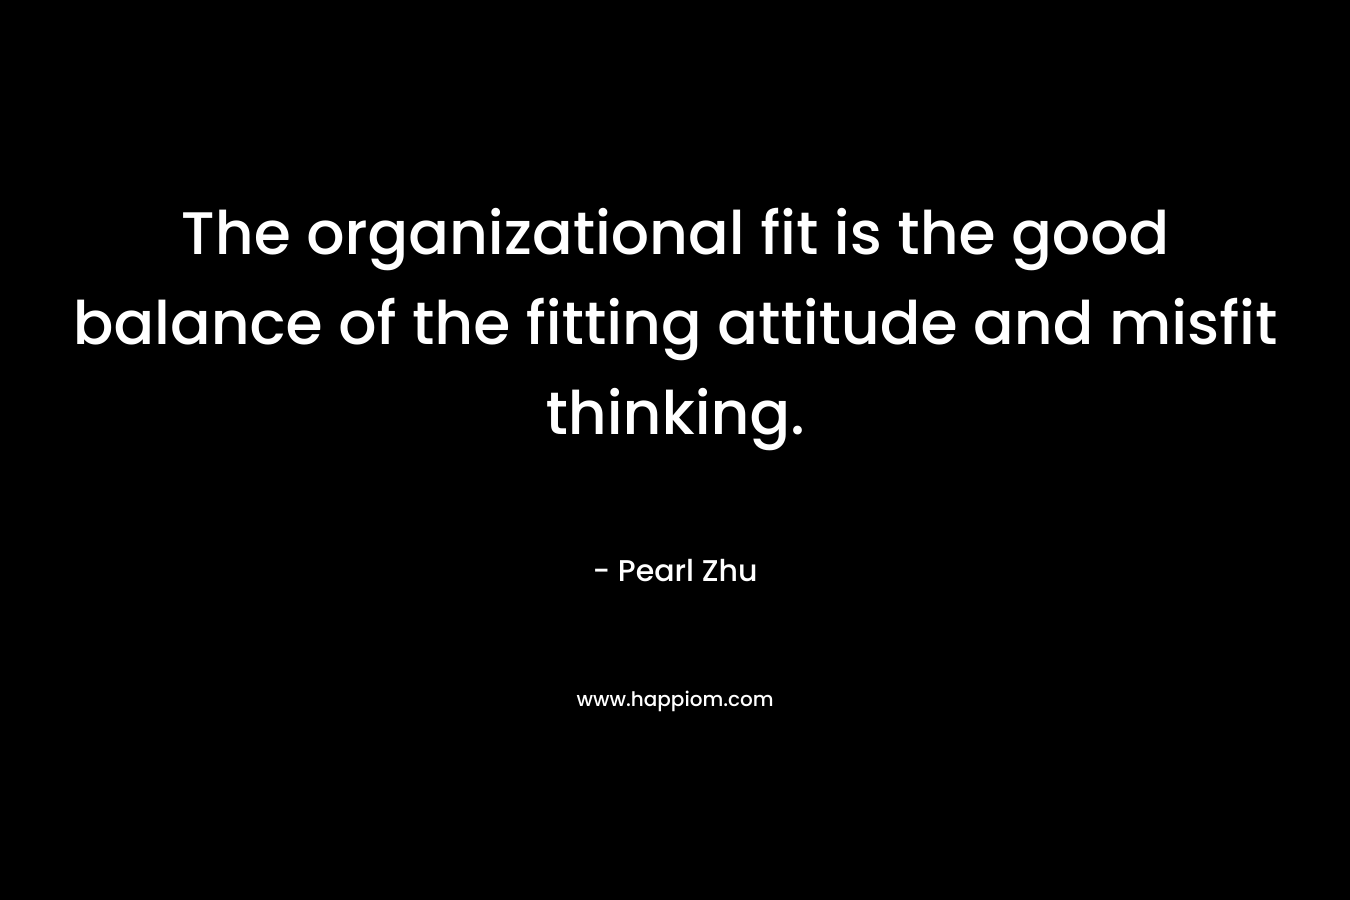 The organizational fit is the good balance of the fitting attitude and misfit thinking. – Pearl Zhu